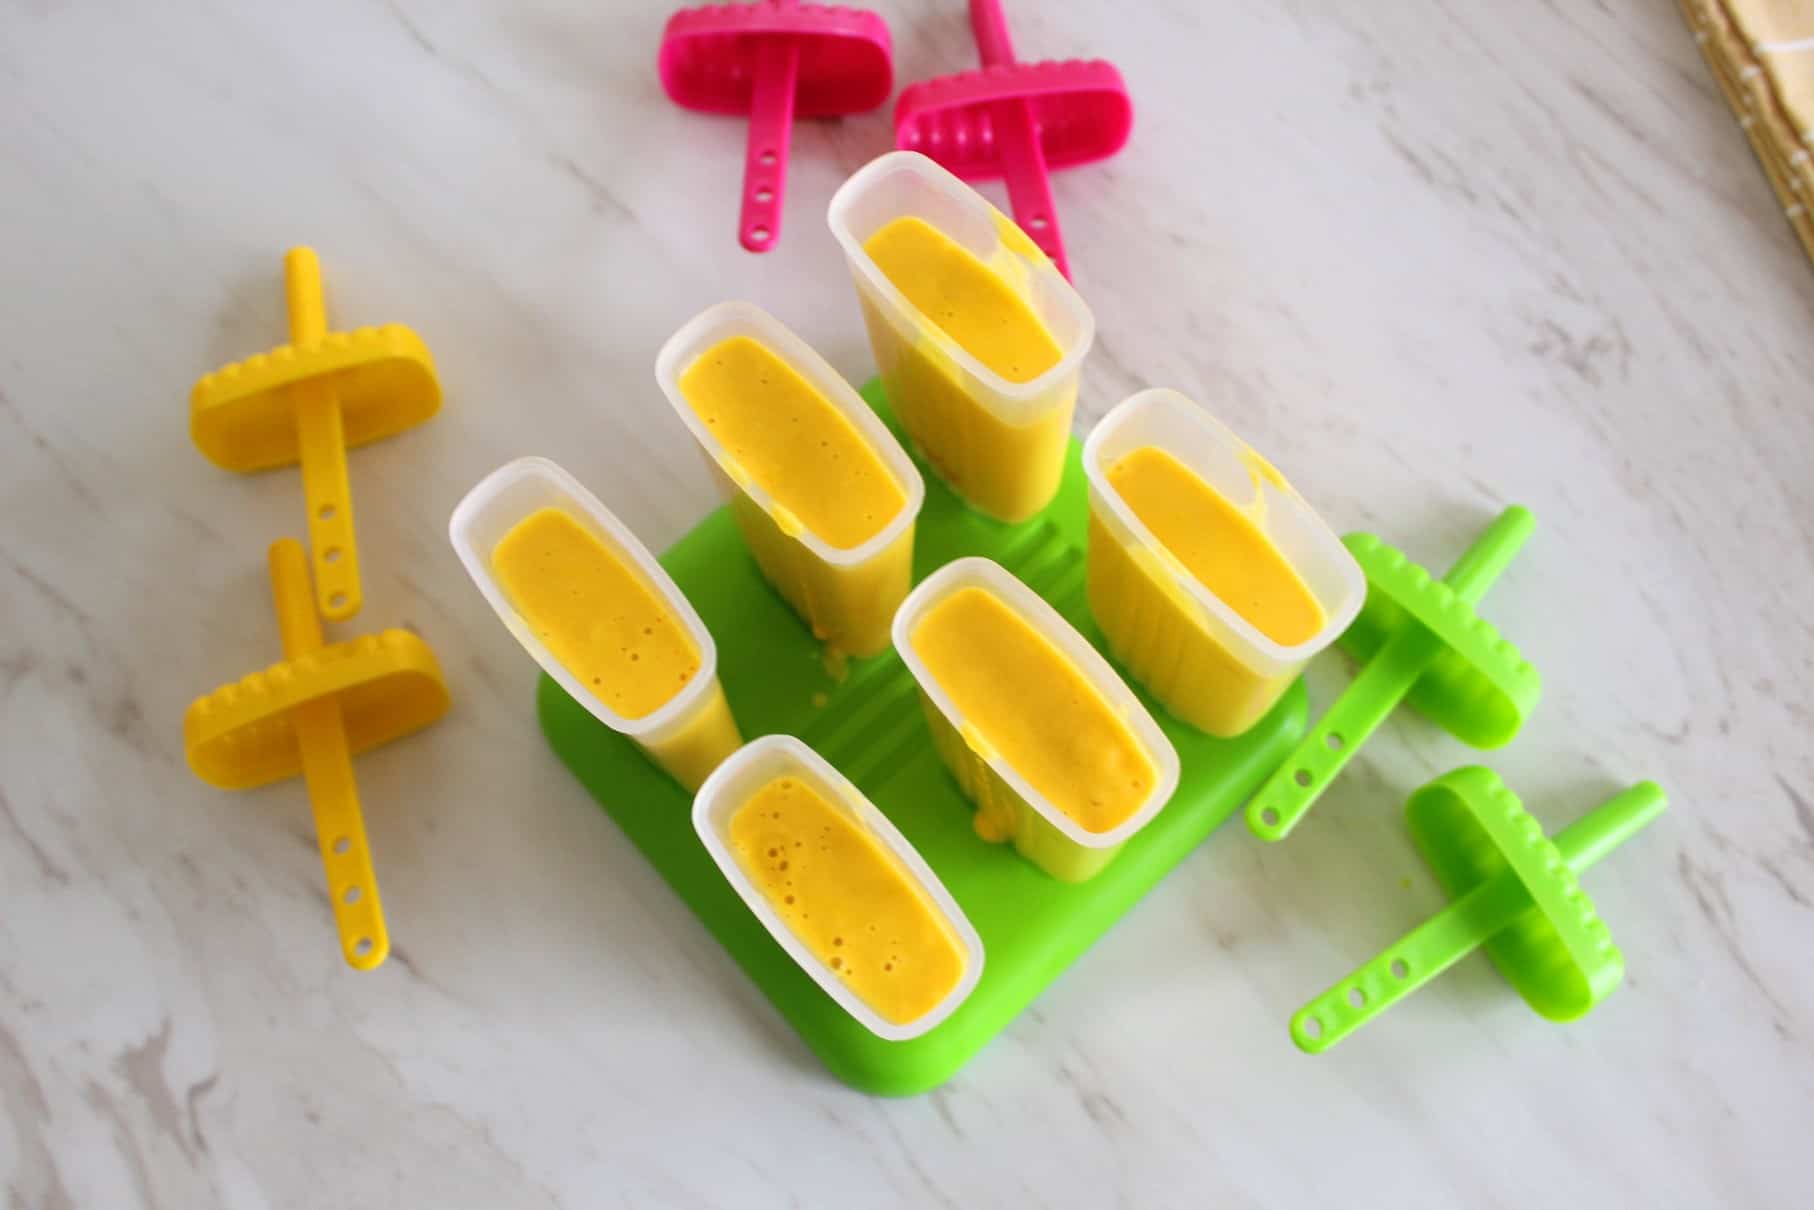 Popsicle molds filled up with the mango blend ready to be frozen.